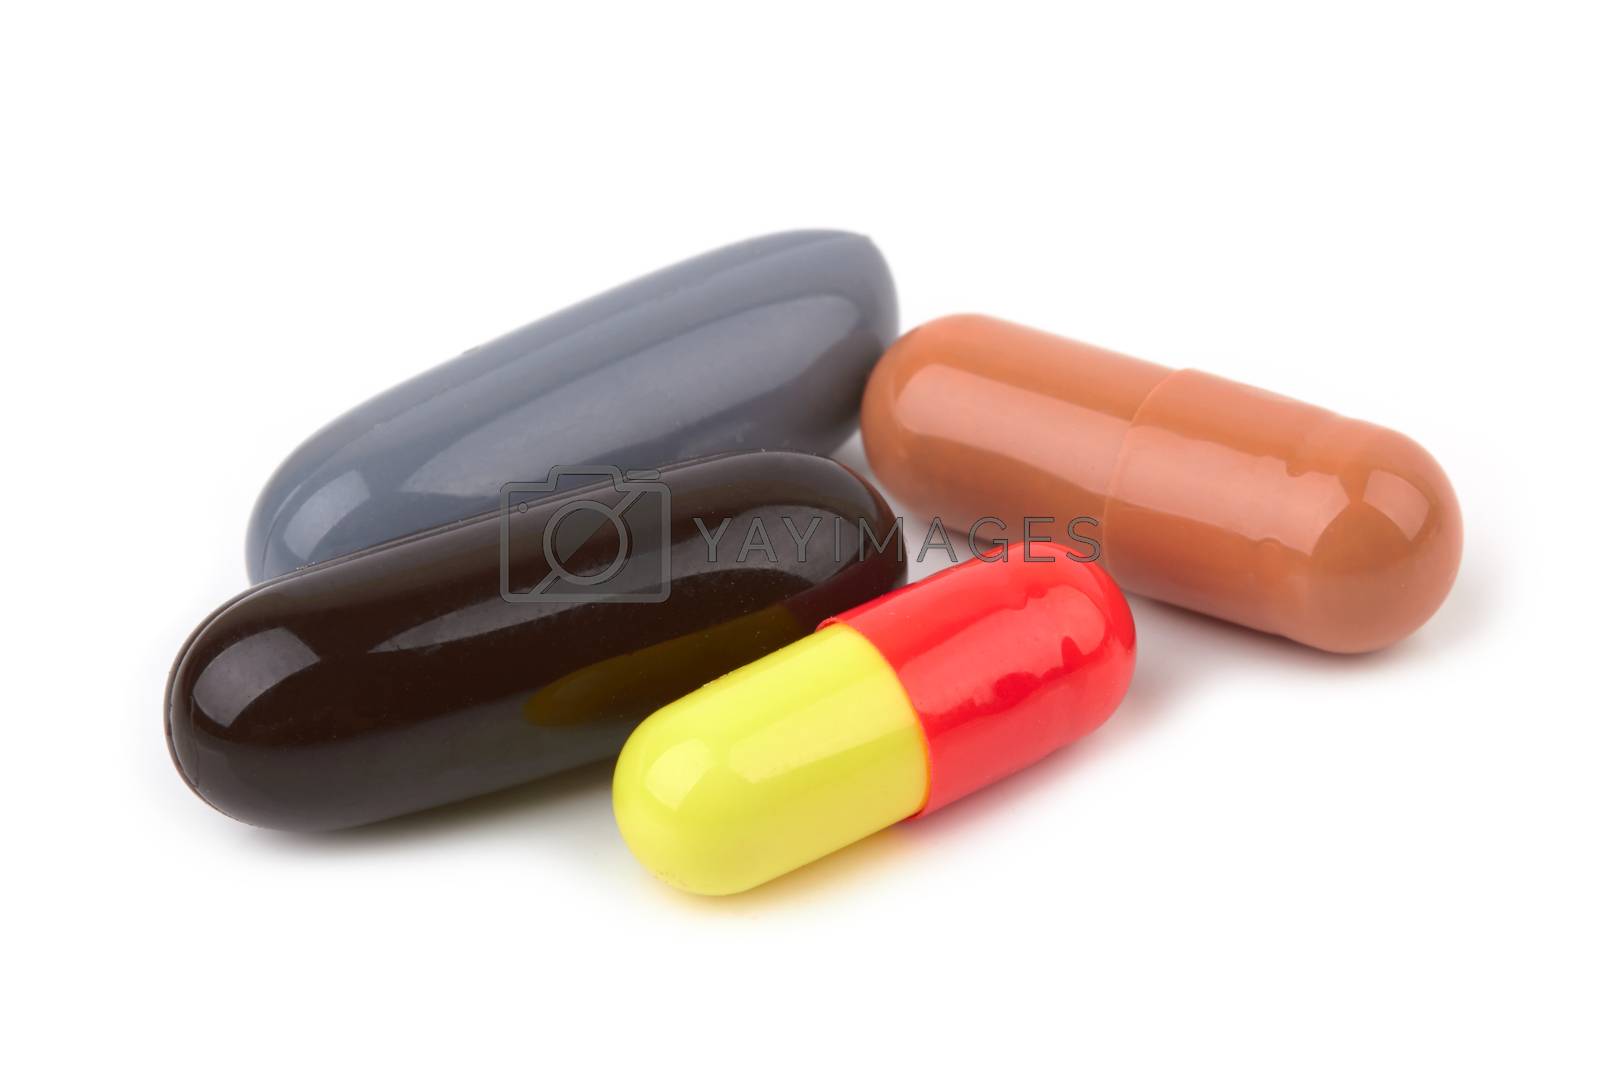 Royalty free image of pills  by pioneer111